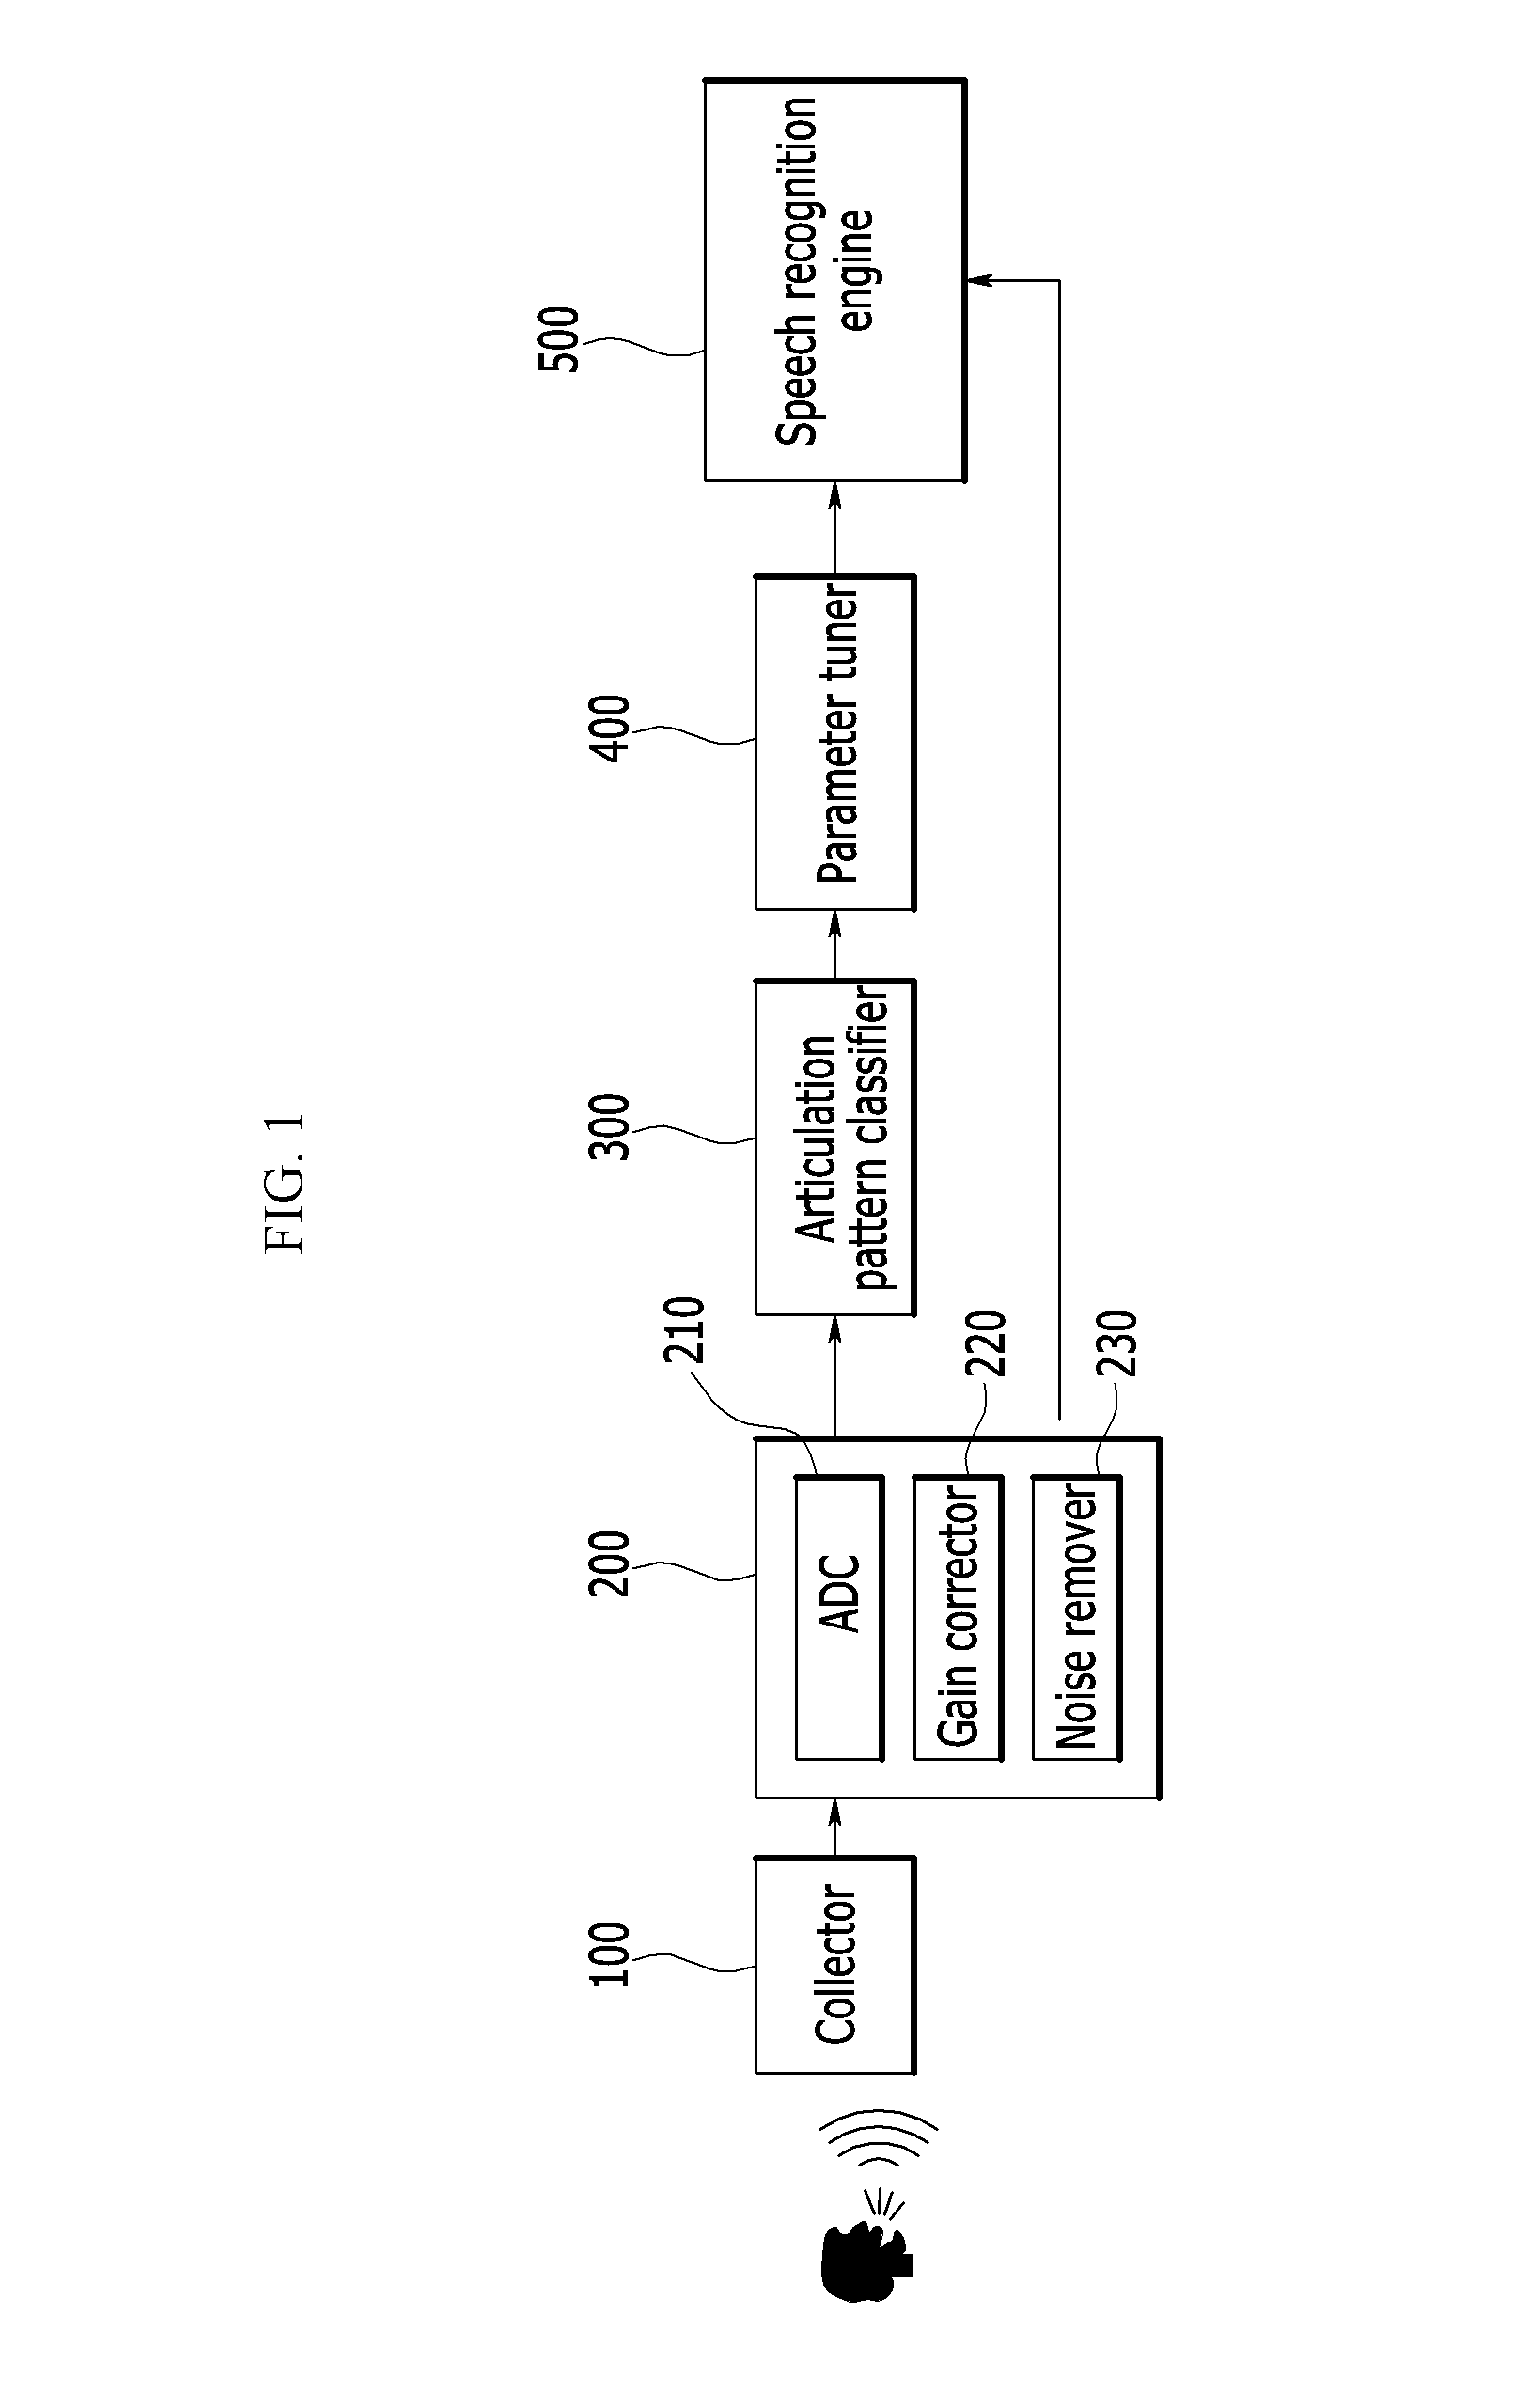 Speech recognition system and speech recognition method